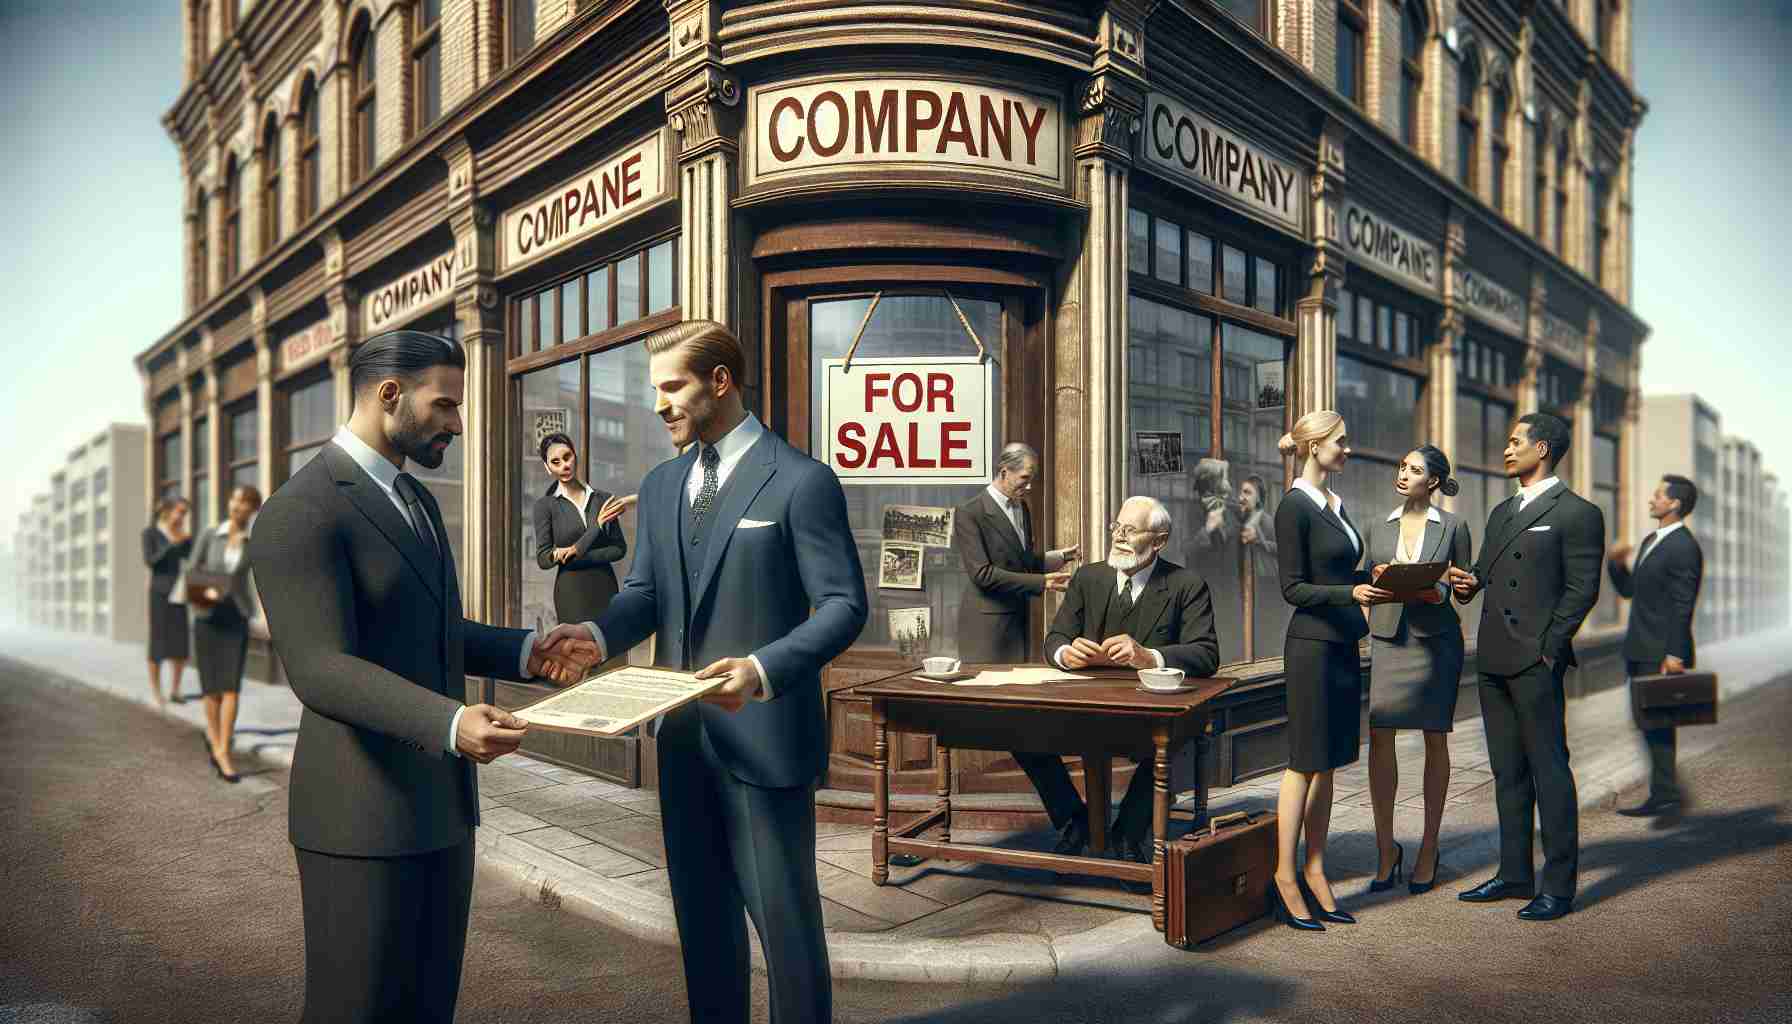 Please generate a realistic and high-definition image that embodies the concept of a historic company under financial stress being sold or transferred to new owners. The image should depict an old-fashioned company building with a 'For Sale' sign on its exterior. A group of diverse business people, including a Caucasian woman and a Black man, should be shown exchanging paper documents, symbolizing the transition of ownership. The scene should also allude to the company's rich history, perhaps through vintage decor or old photographs displayed within the premises.